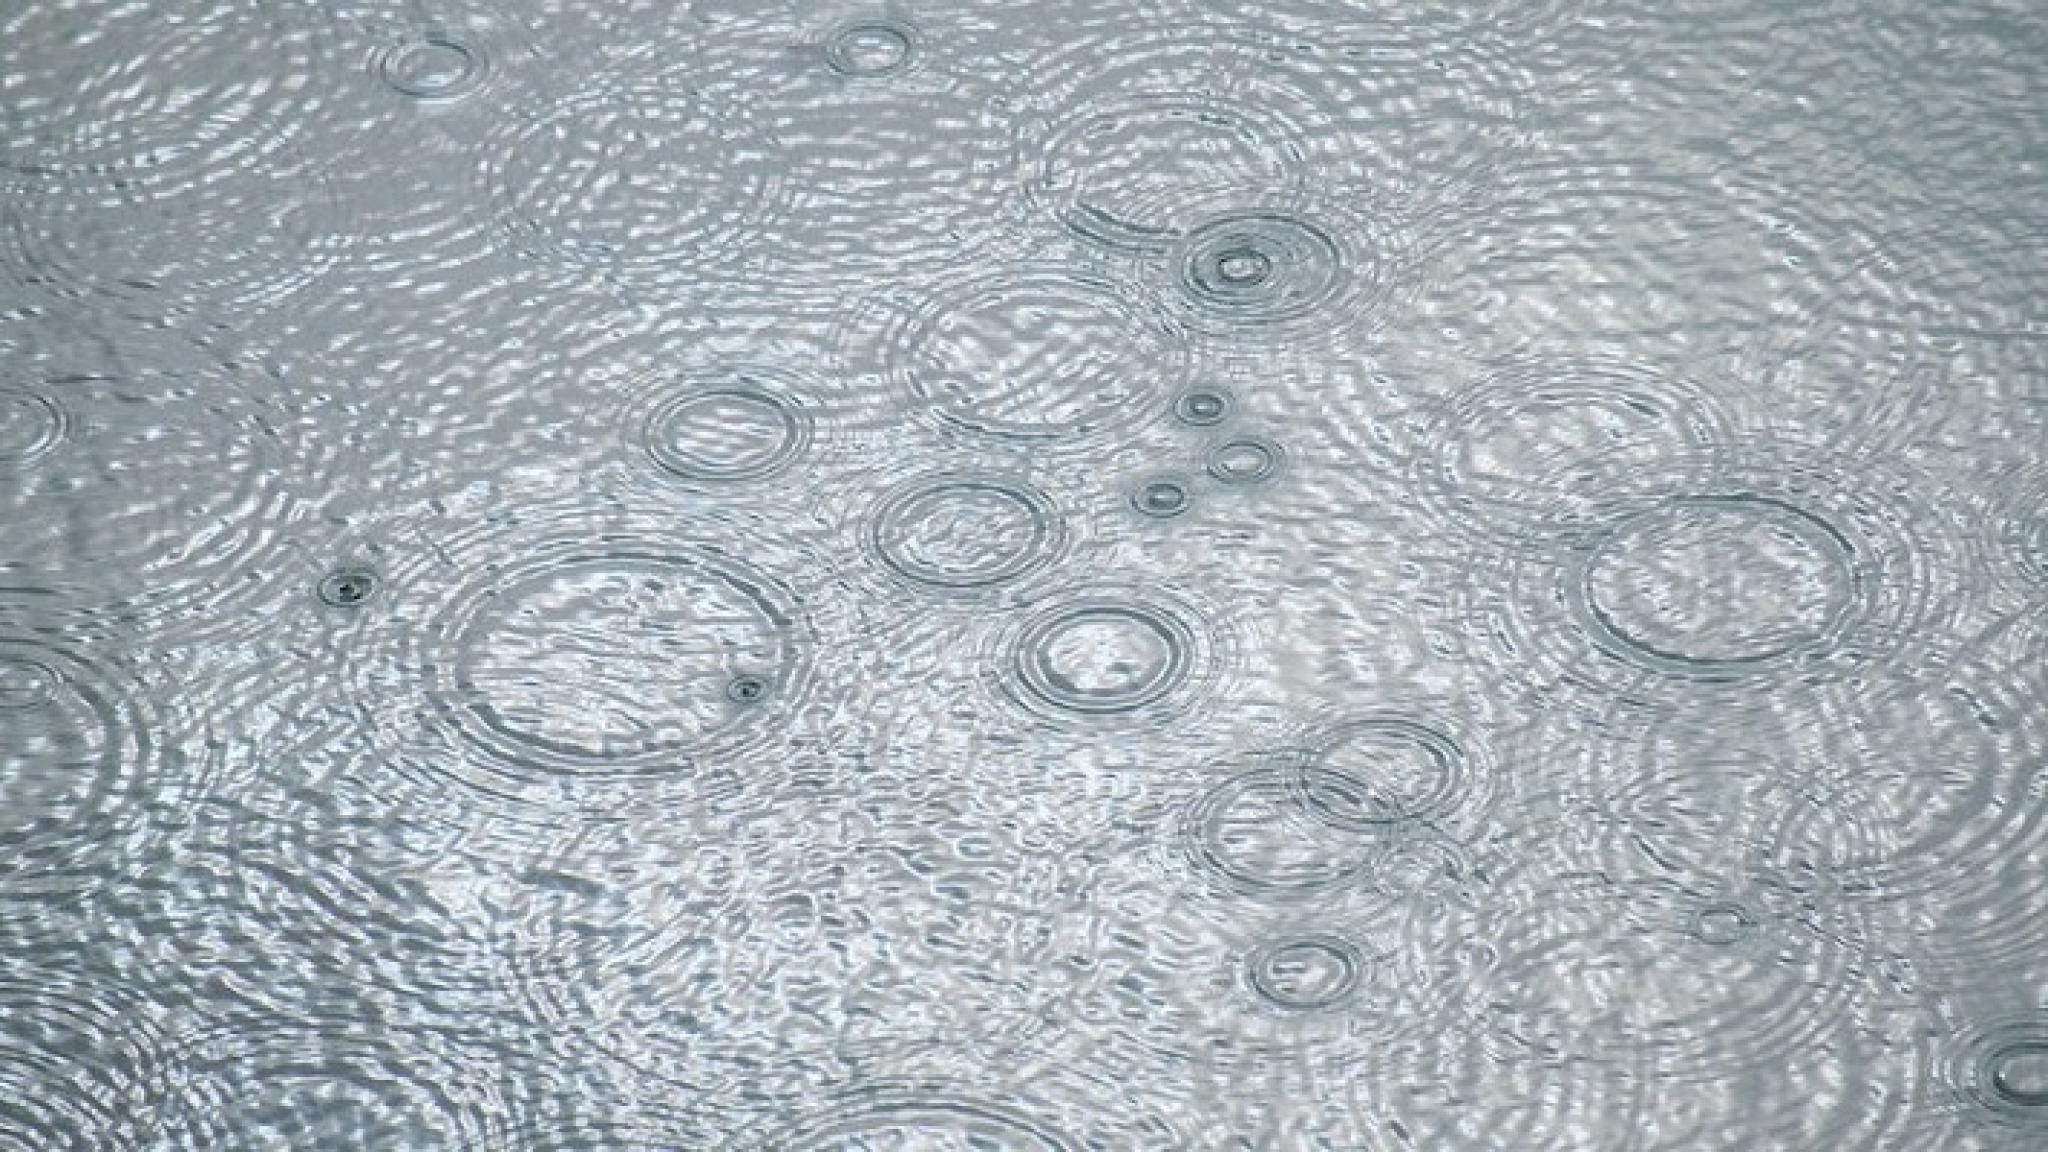 Image of ripples in water by Michael Gabelmann from https://flic.kr/p/ou7L1n, free to use under https://creativecommons.org/licenses/by-nc/2.0/